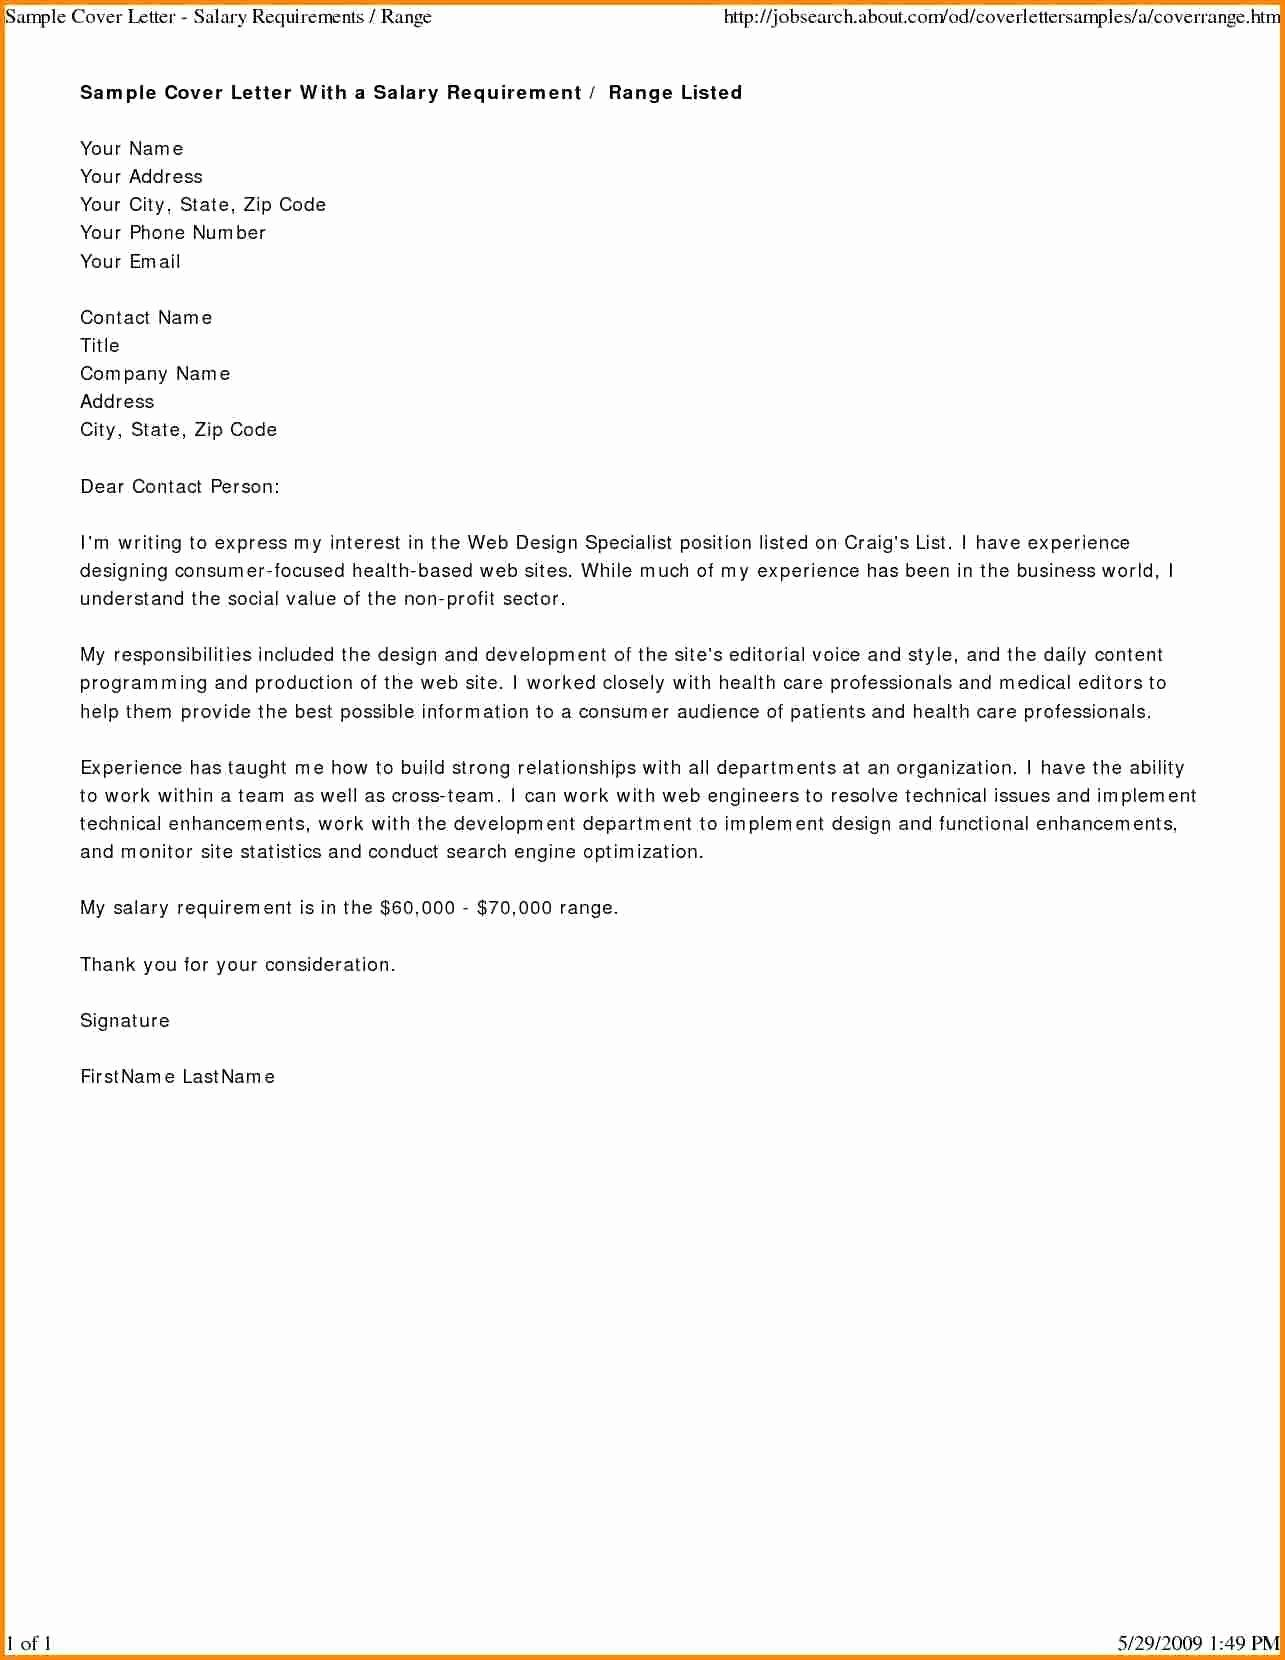 General Cover Letter Template Free - 28 New General Cover Letter Sample Resume Templates Resume Templates